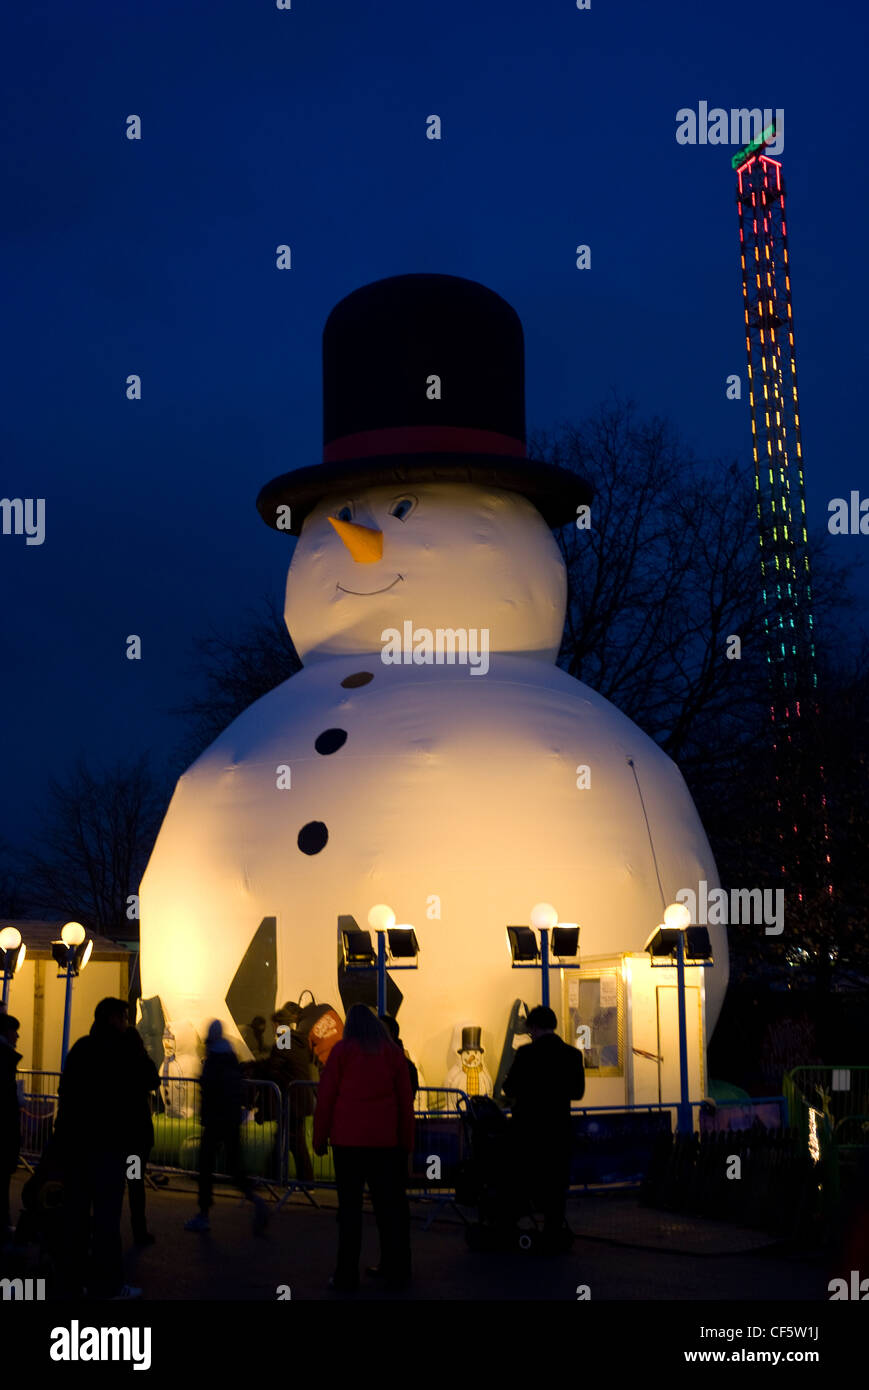 A giant inflatable snowman at the Winter Wonderland in Hyde Park. Stock Photo